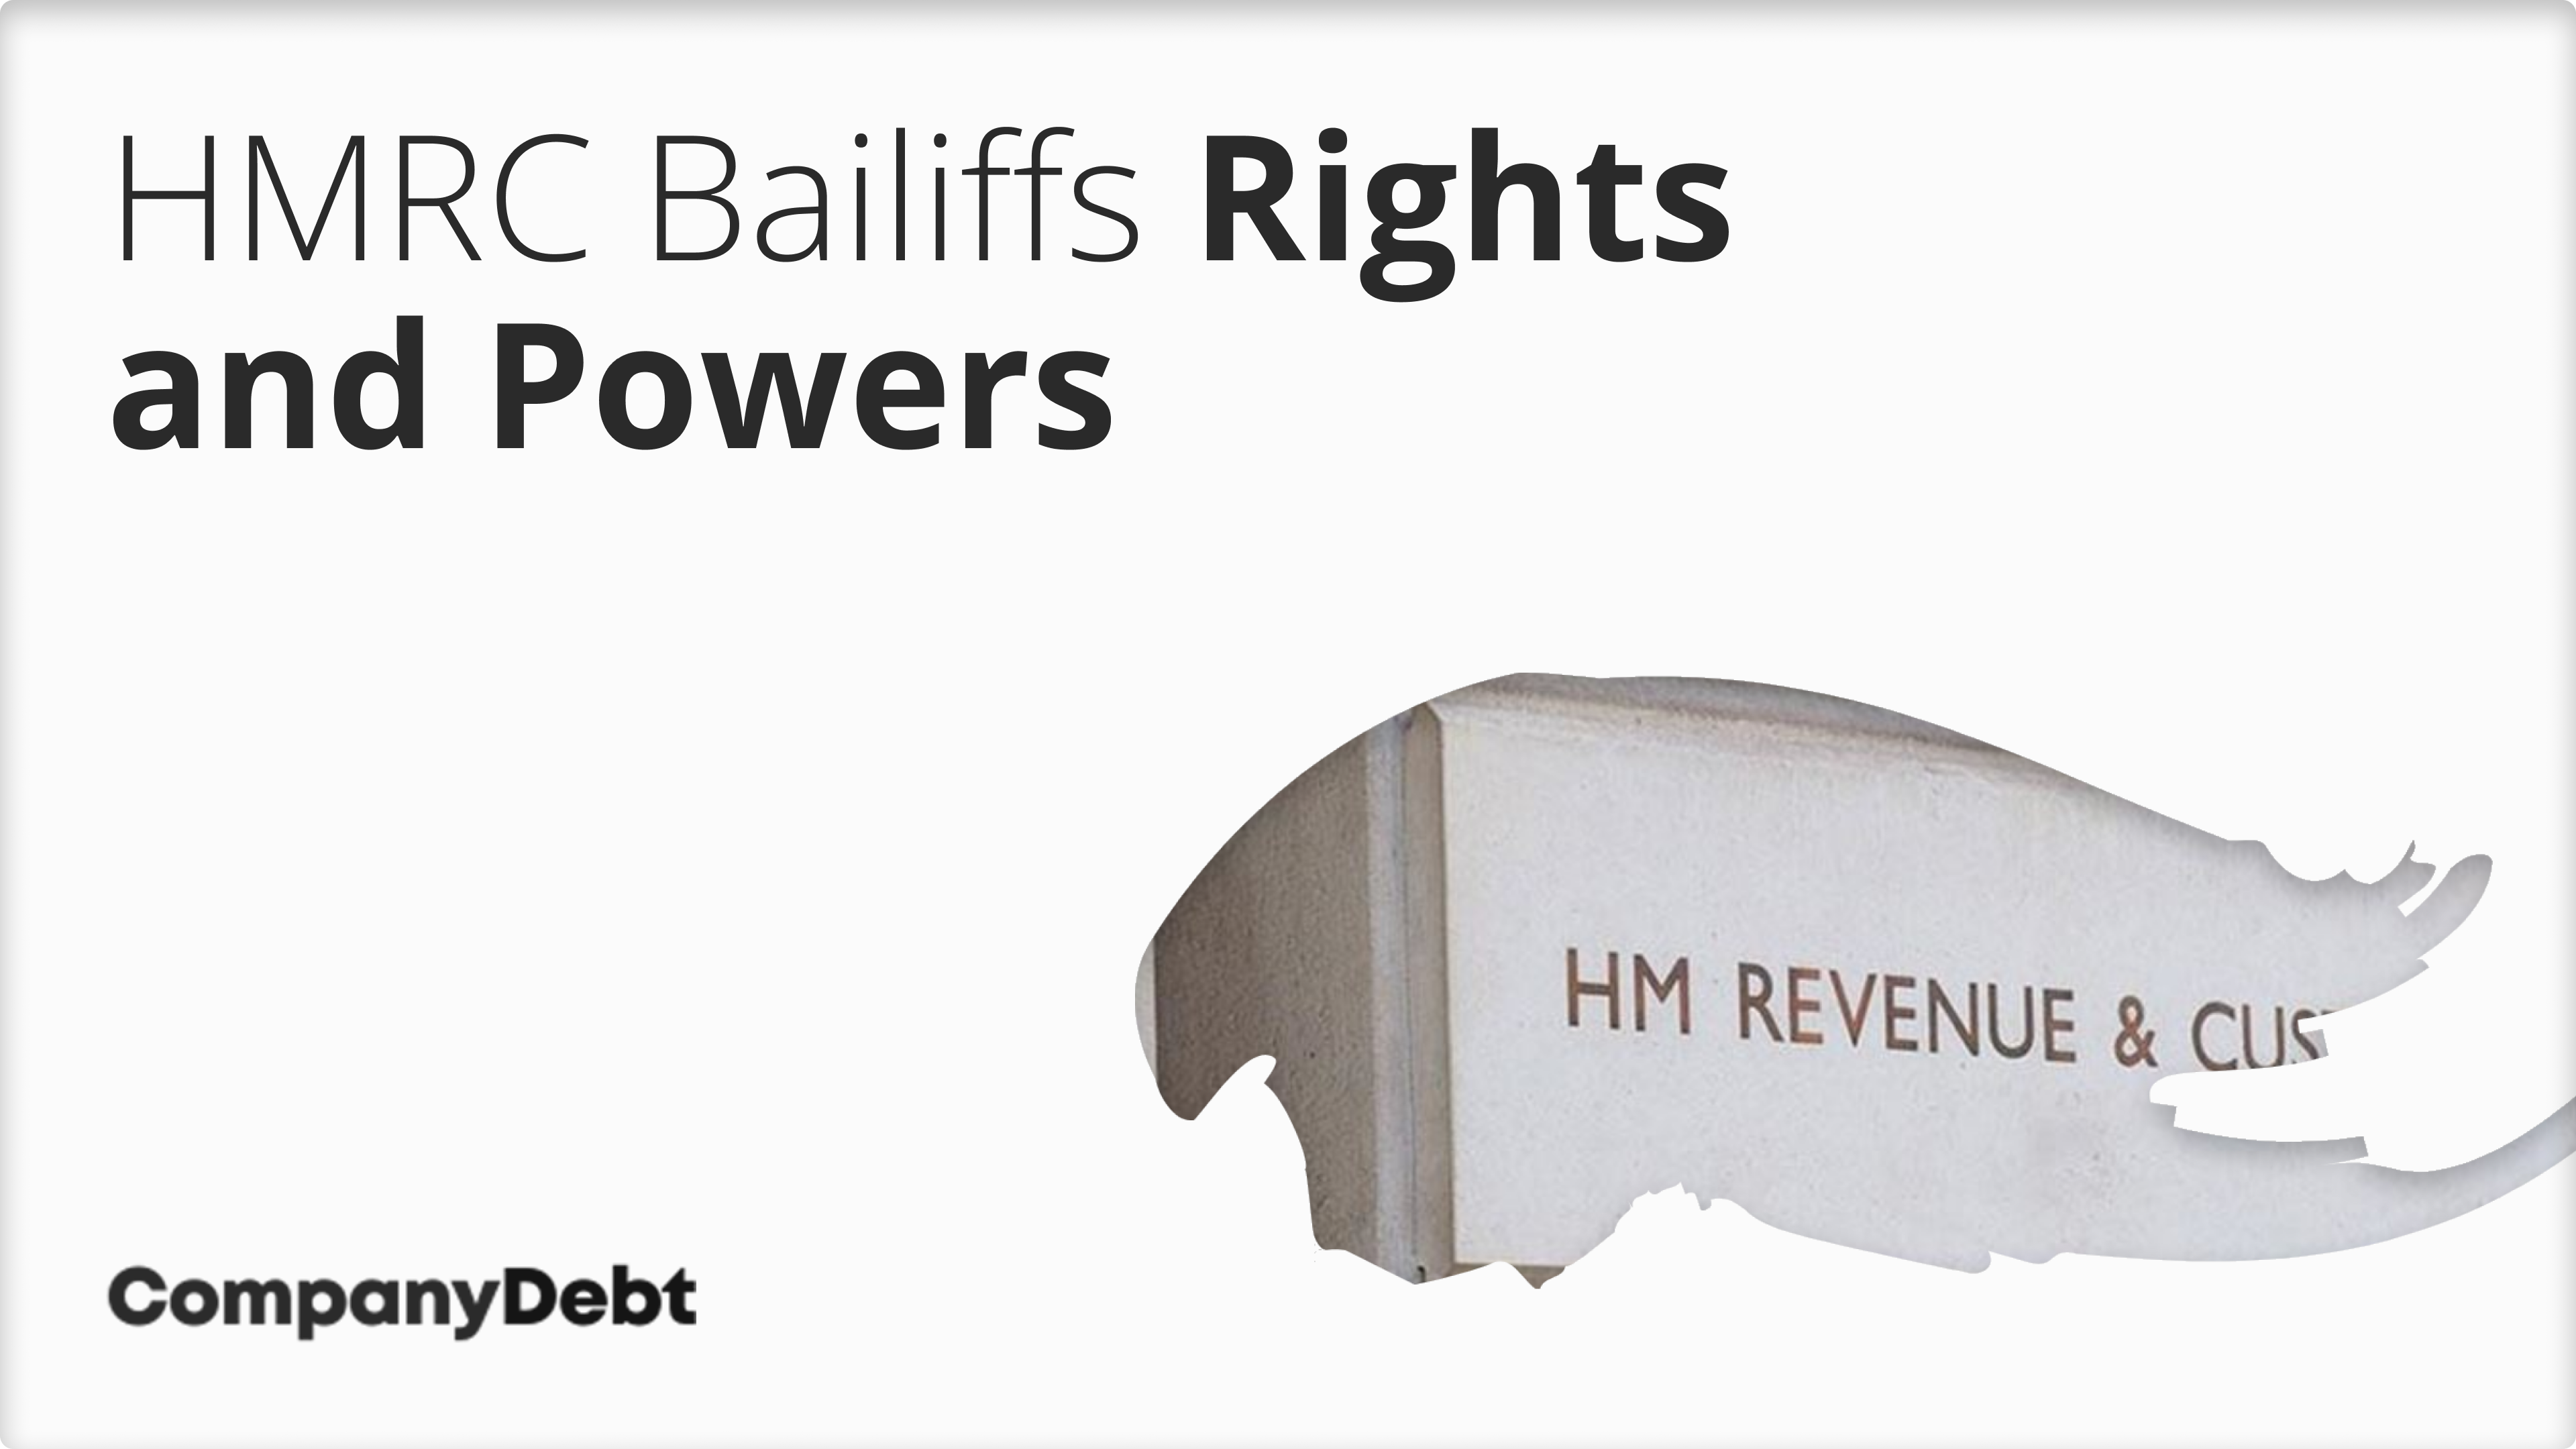 HMRC-Bailiffs-What-Are-the-Rights-and-Powers-of-Enforcement-Officers_